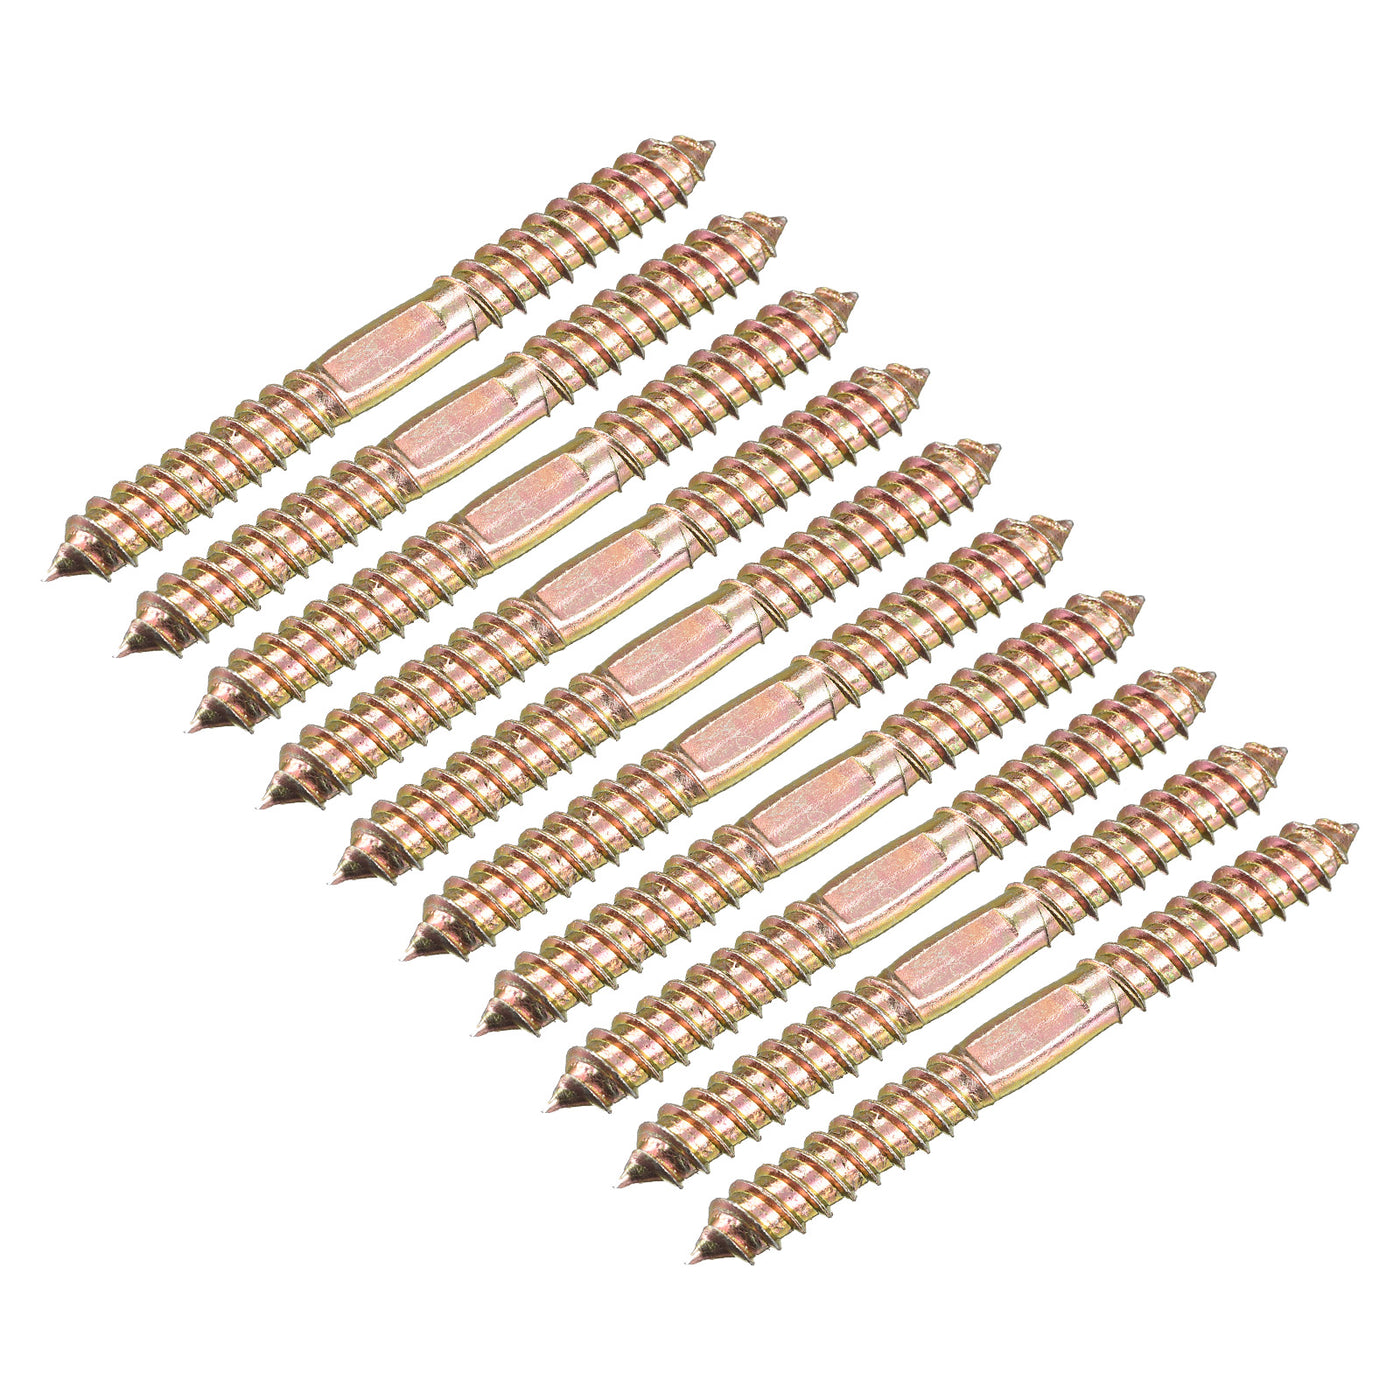 Uxcell Uxcell 10x80mm Hanger Bolts, 12pcs Double Ended Thread Wood to Wood Dowel Screws